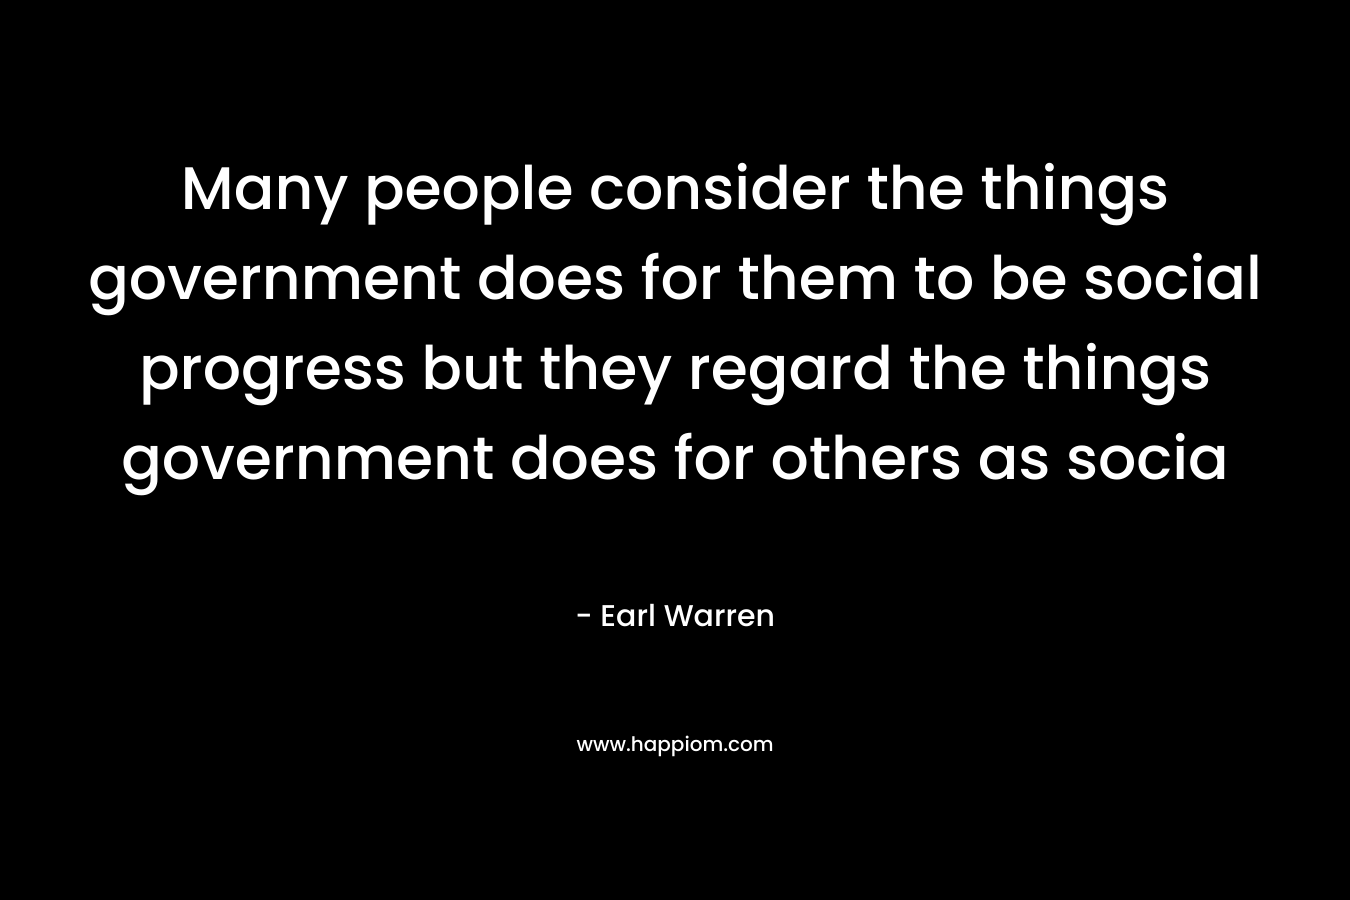 Many people consider the things government does for them to be social progress but they regard the things government does for others as socia